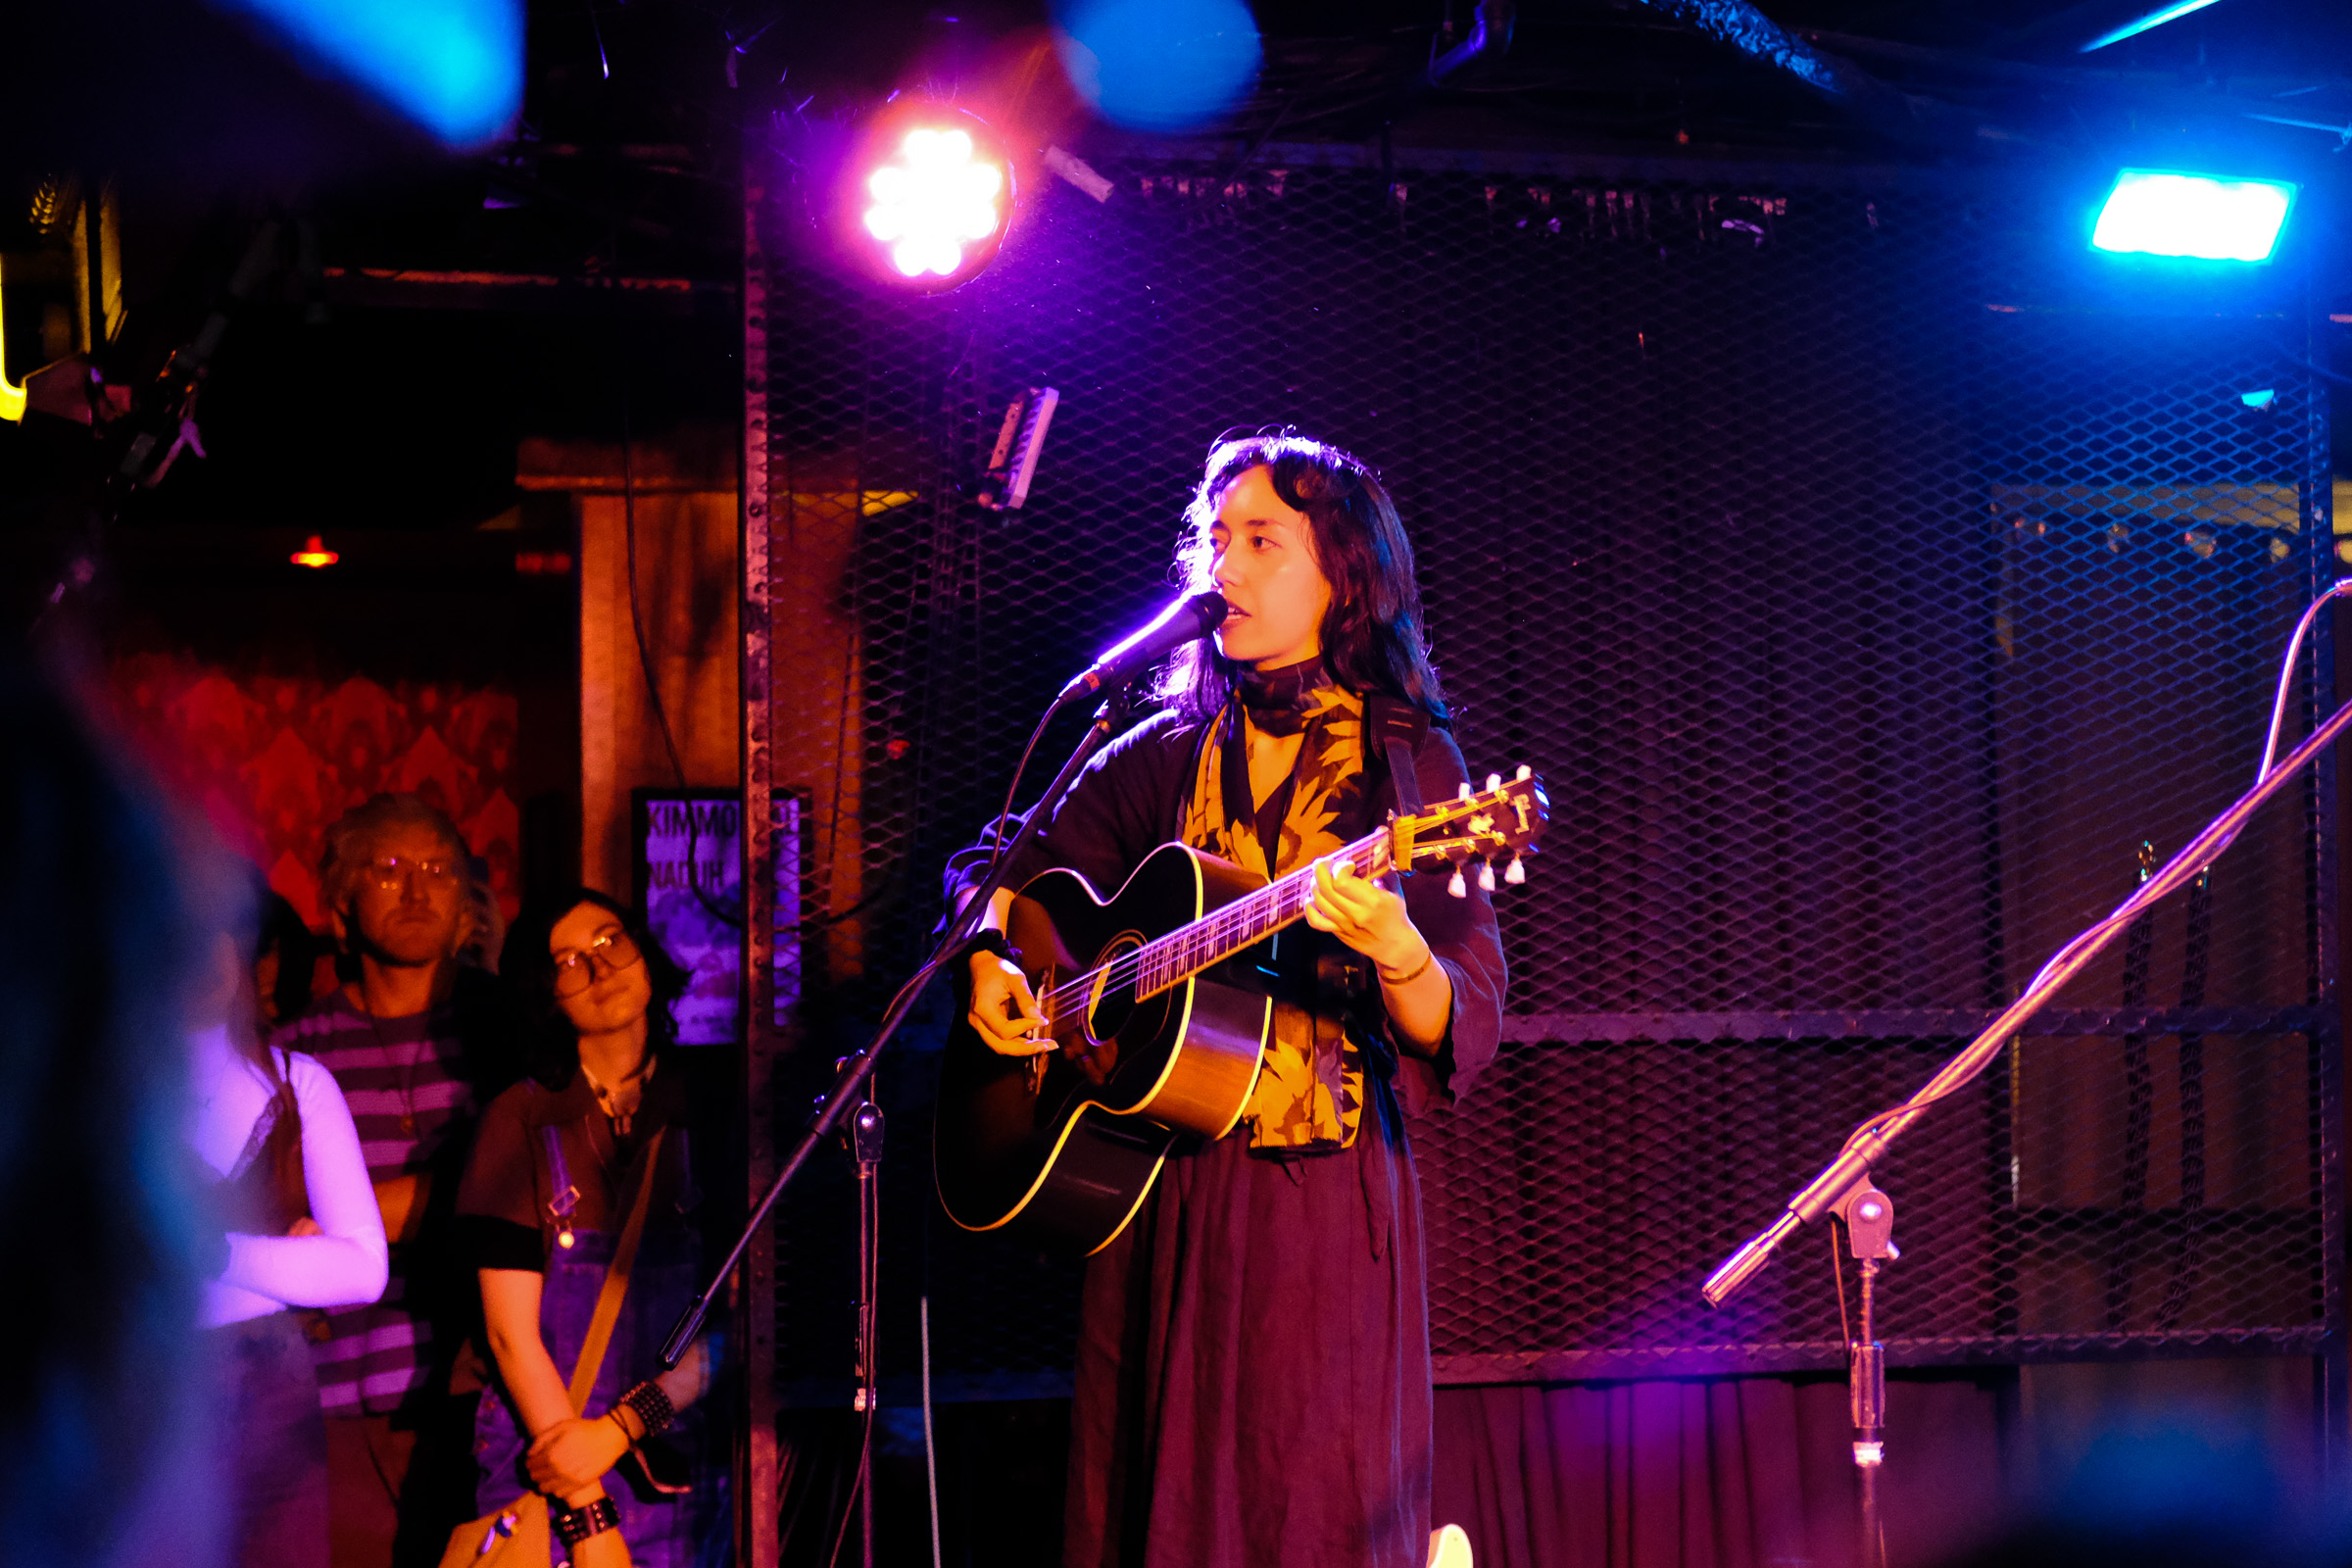 Haley Heynderickx performing on stage at the Biltmore Cabaret in Vancouver